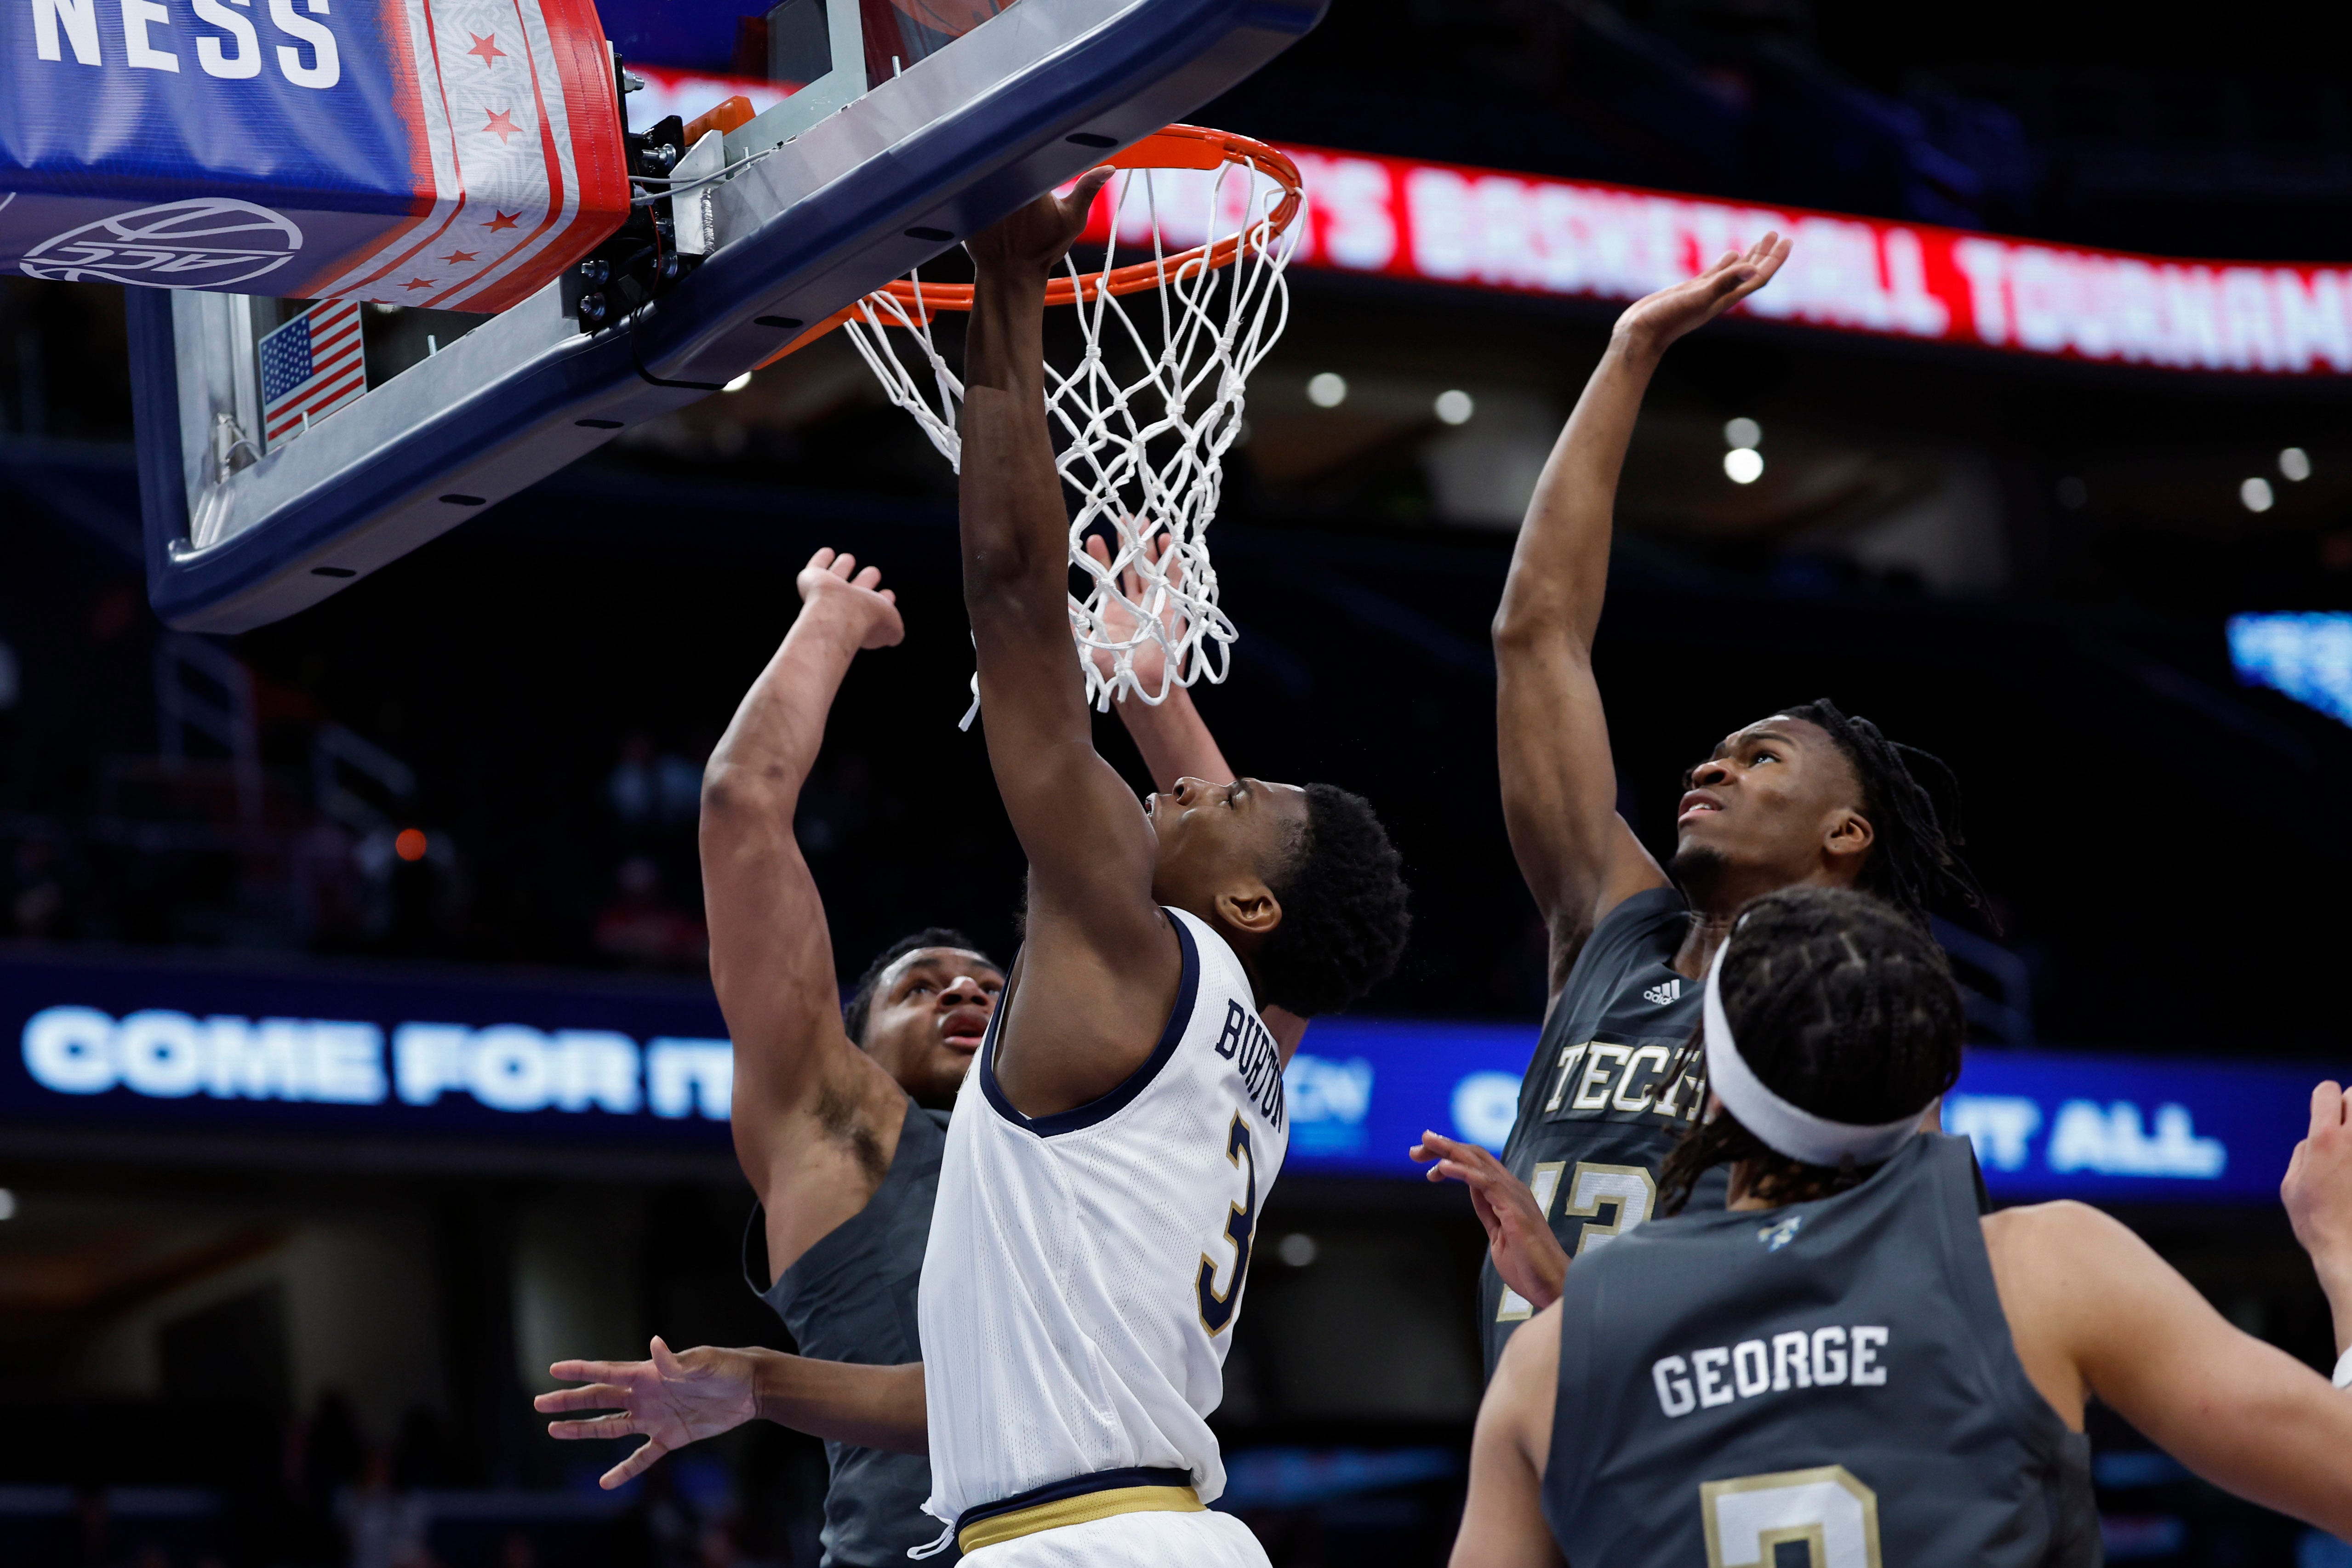 Mar 12, 2024; Washington, D.C., USA; Notre Dame Fighting Irish guard Markus Burton (3) shoots the ball as Georgia Tech Yellow Jackets guard Miles Kelly (13) defends in the second half at Capital One Arena. Mandatory Credit: Geoff Burke-USA TODAY Sports